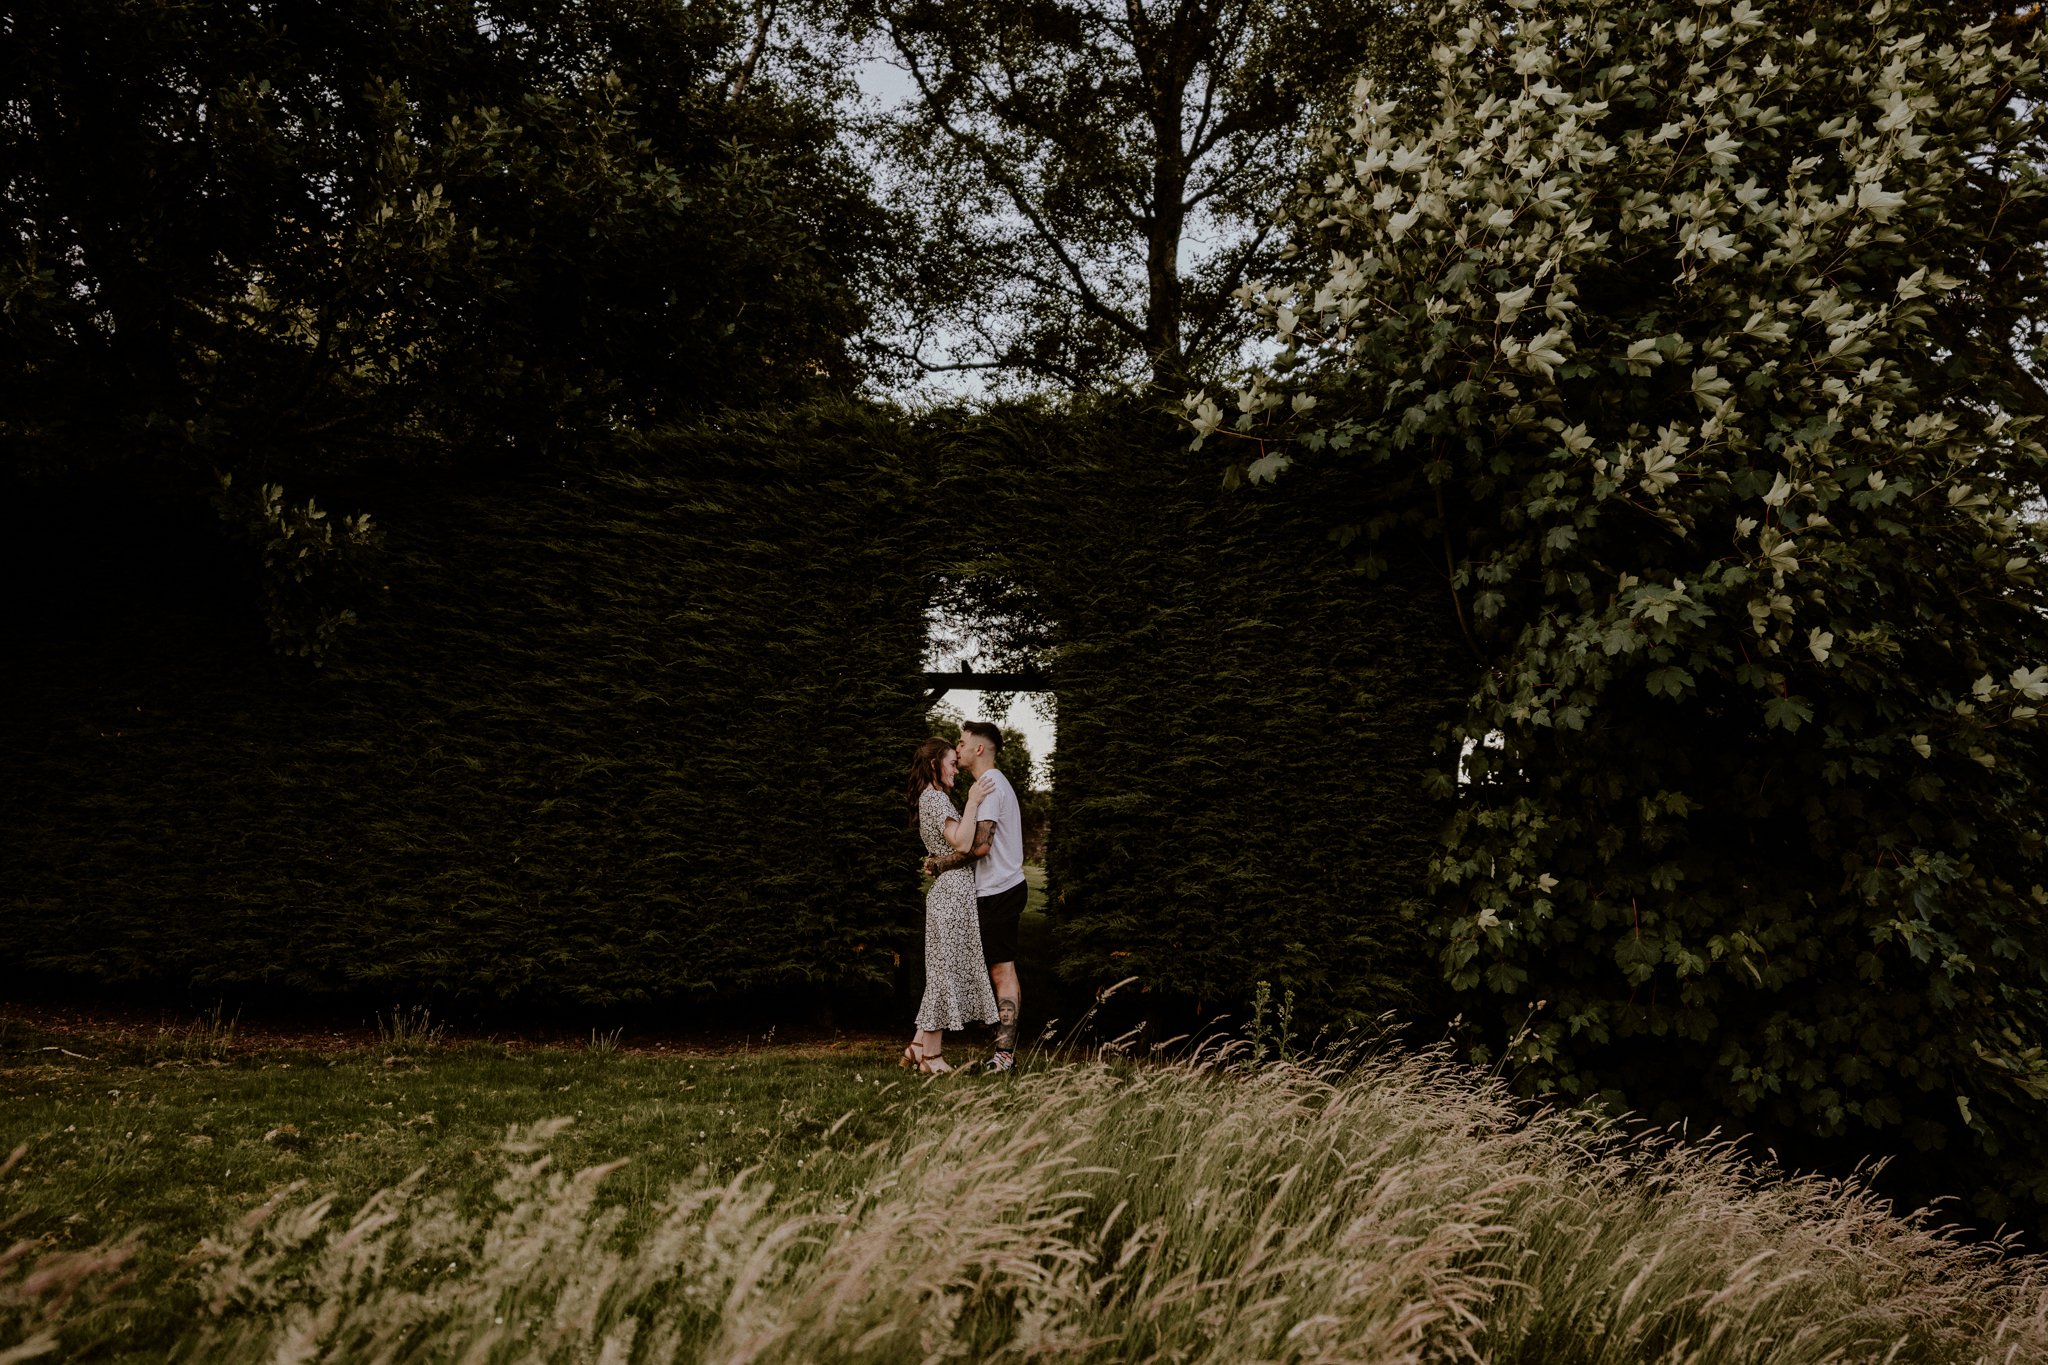 Angus Scotland Engagement and Wedding Photographer - Emily and Gabriel - Adventure Couple Session16.jpg